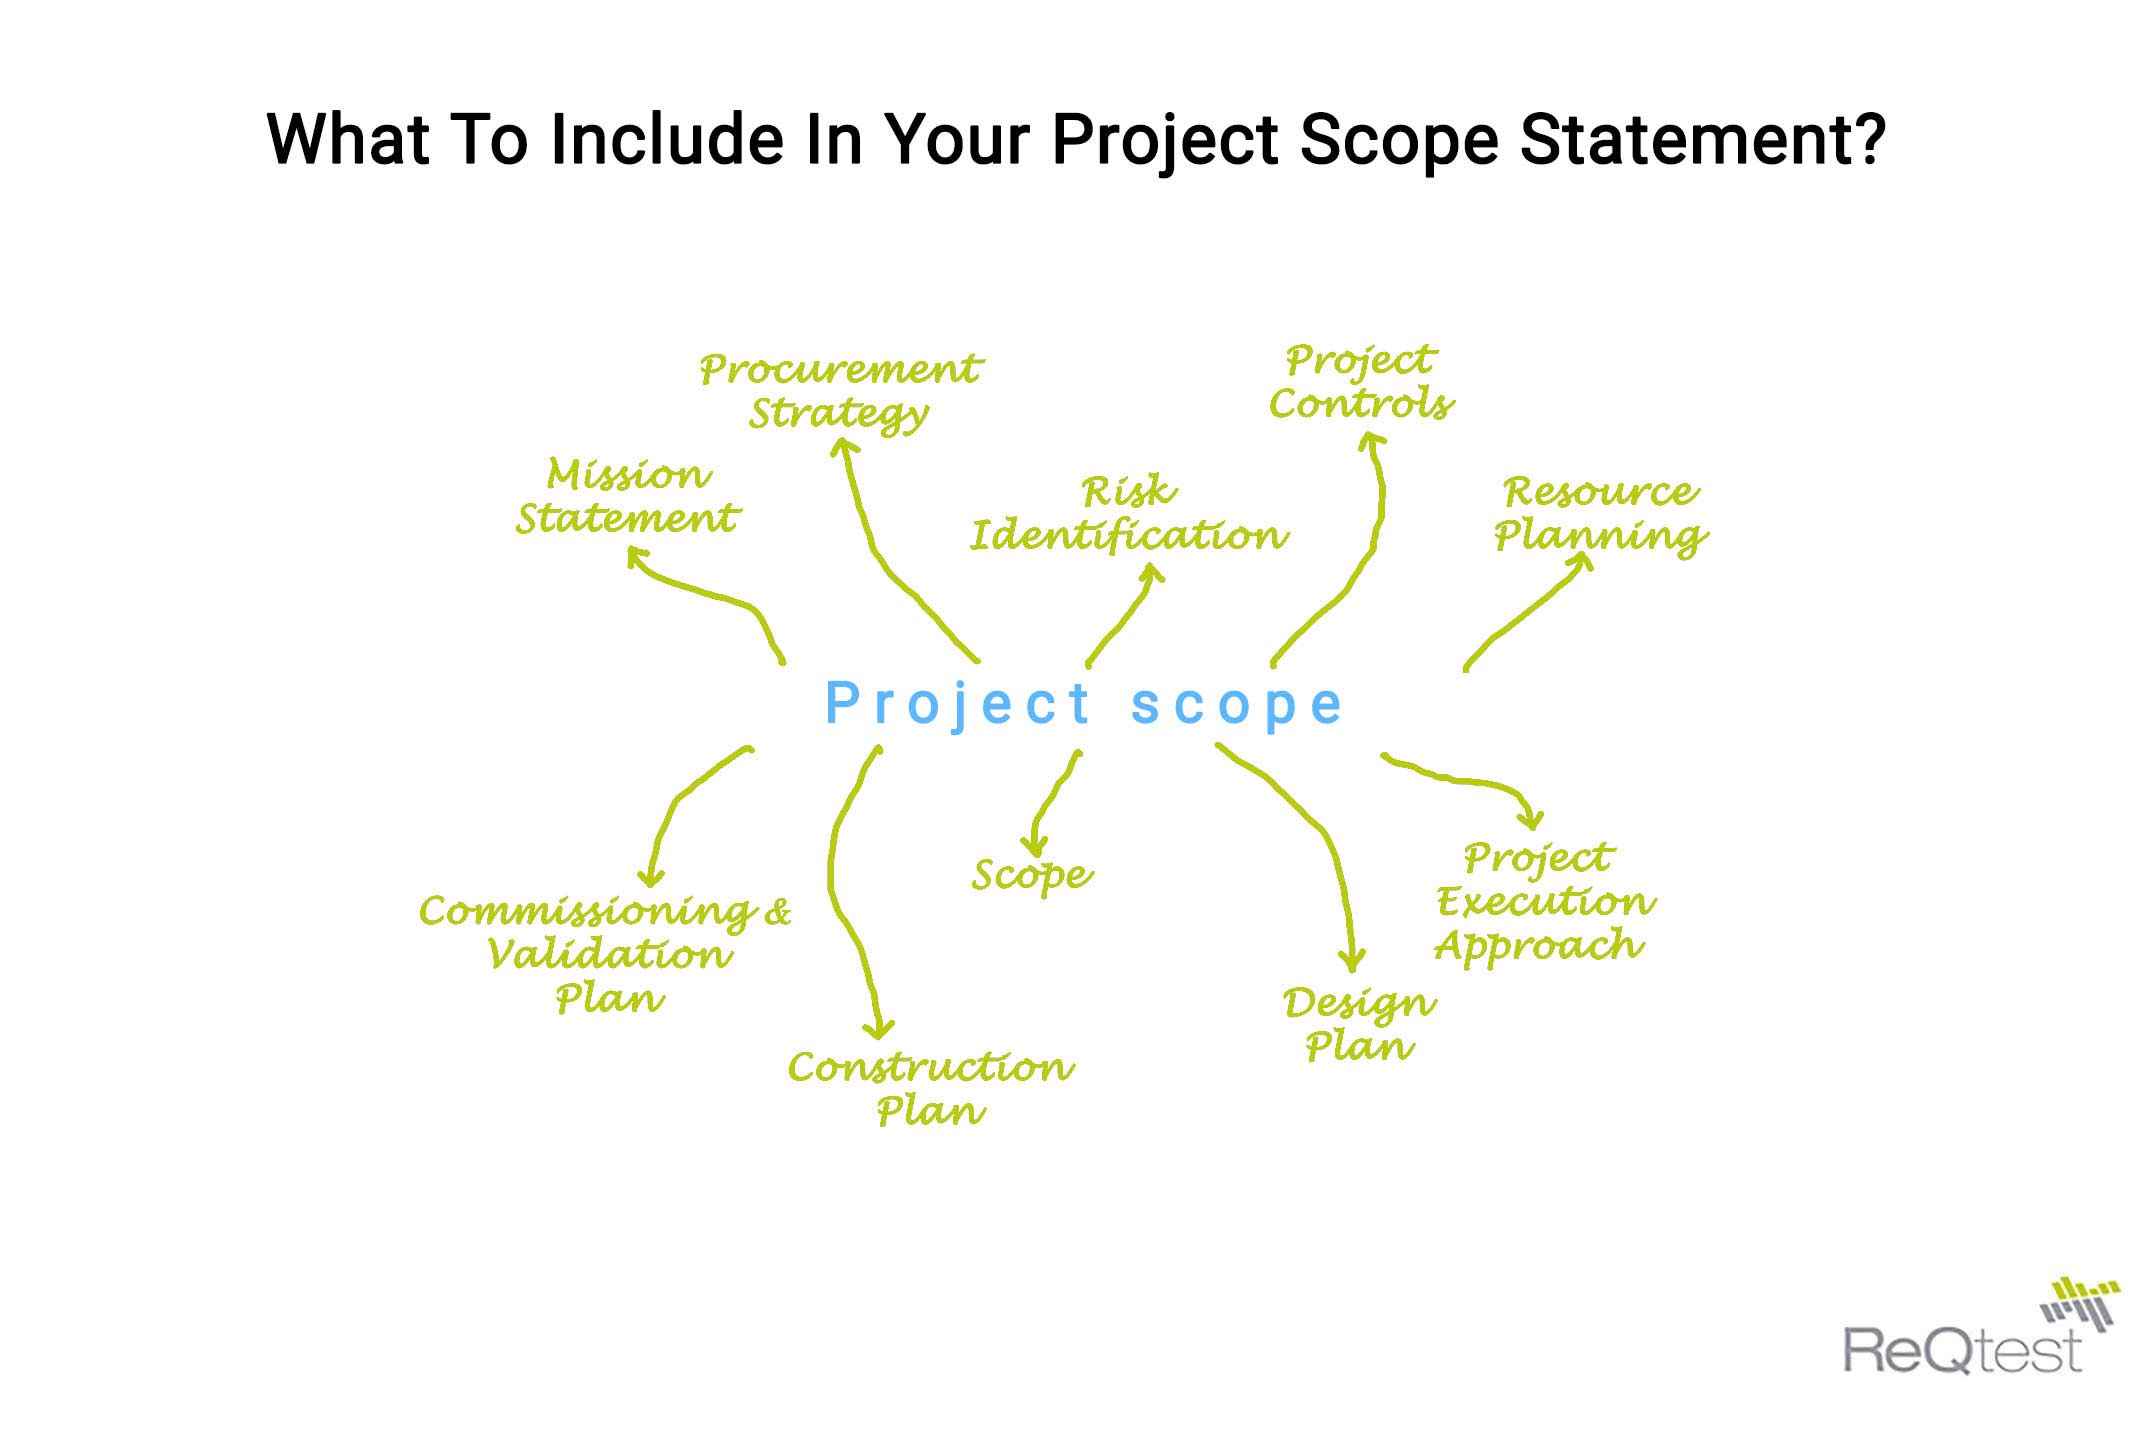 What To Include In Your Project Scope Statement? | ReQtest